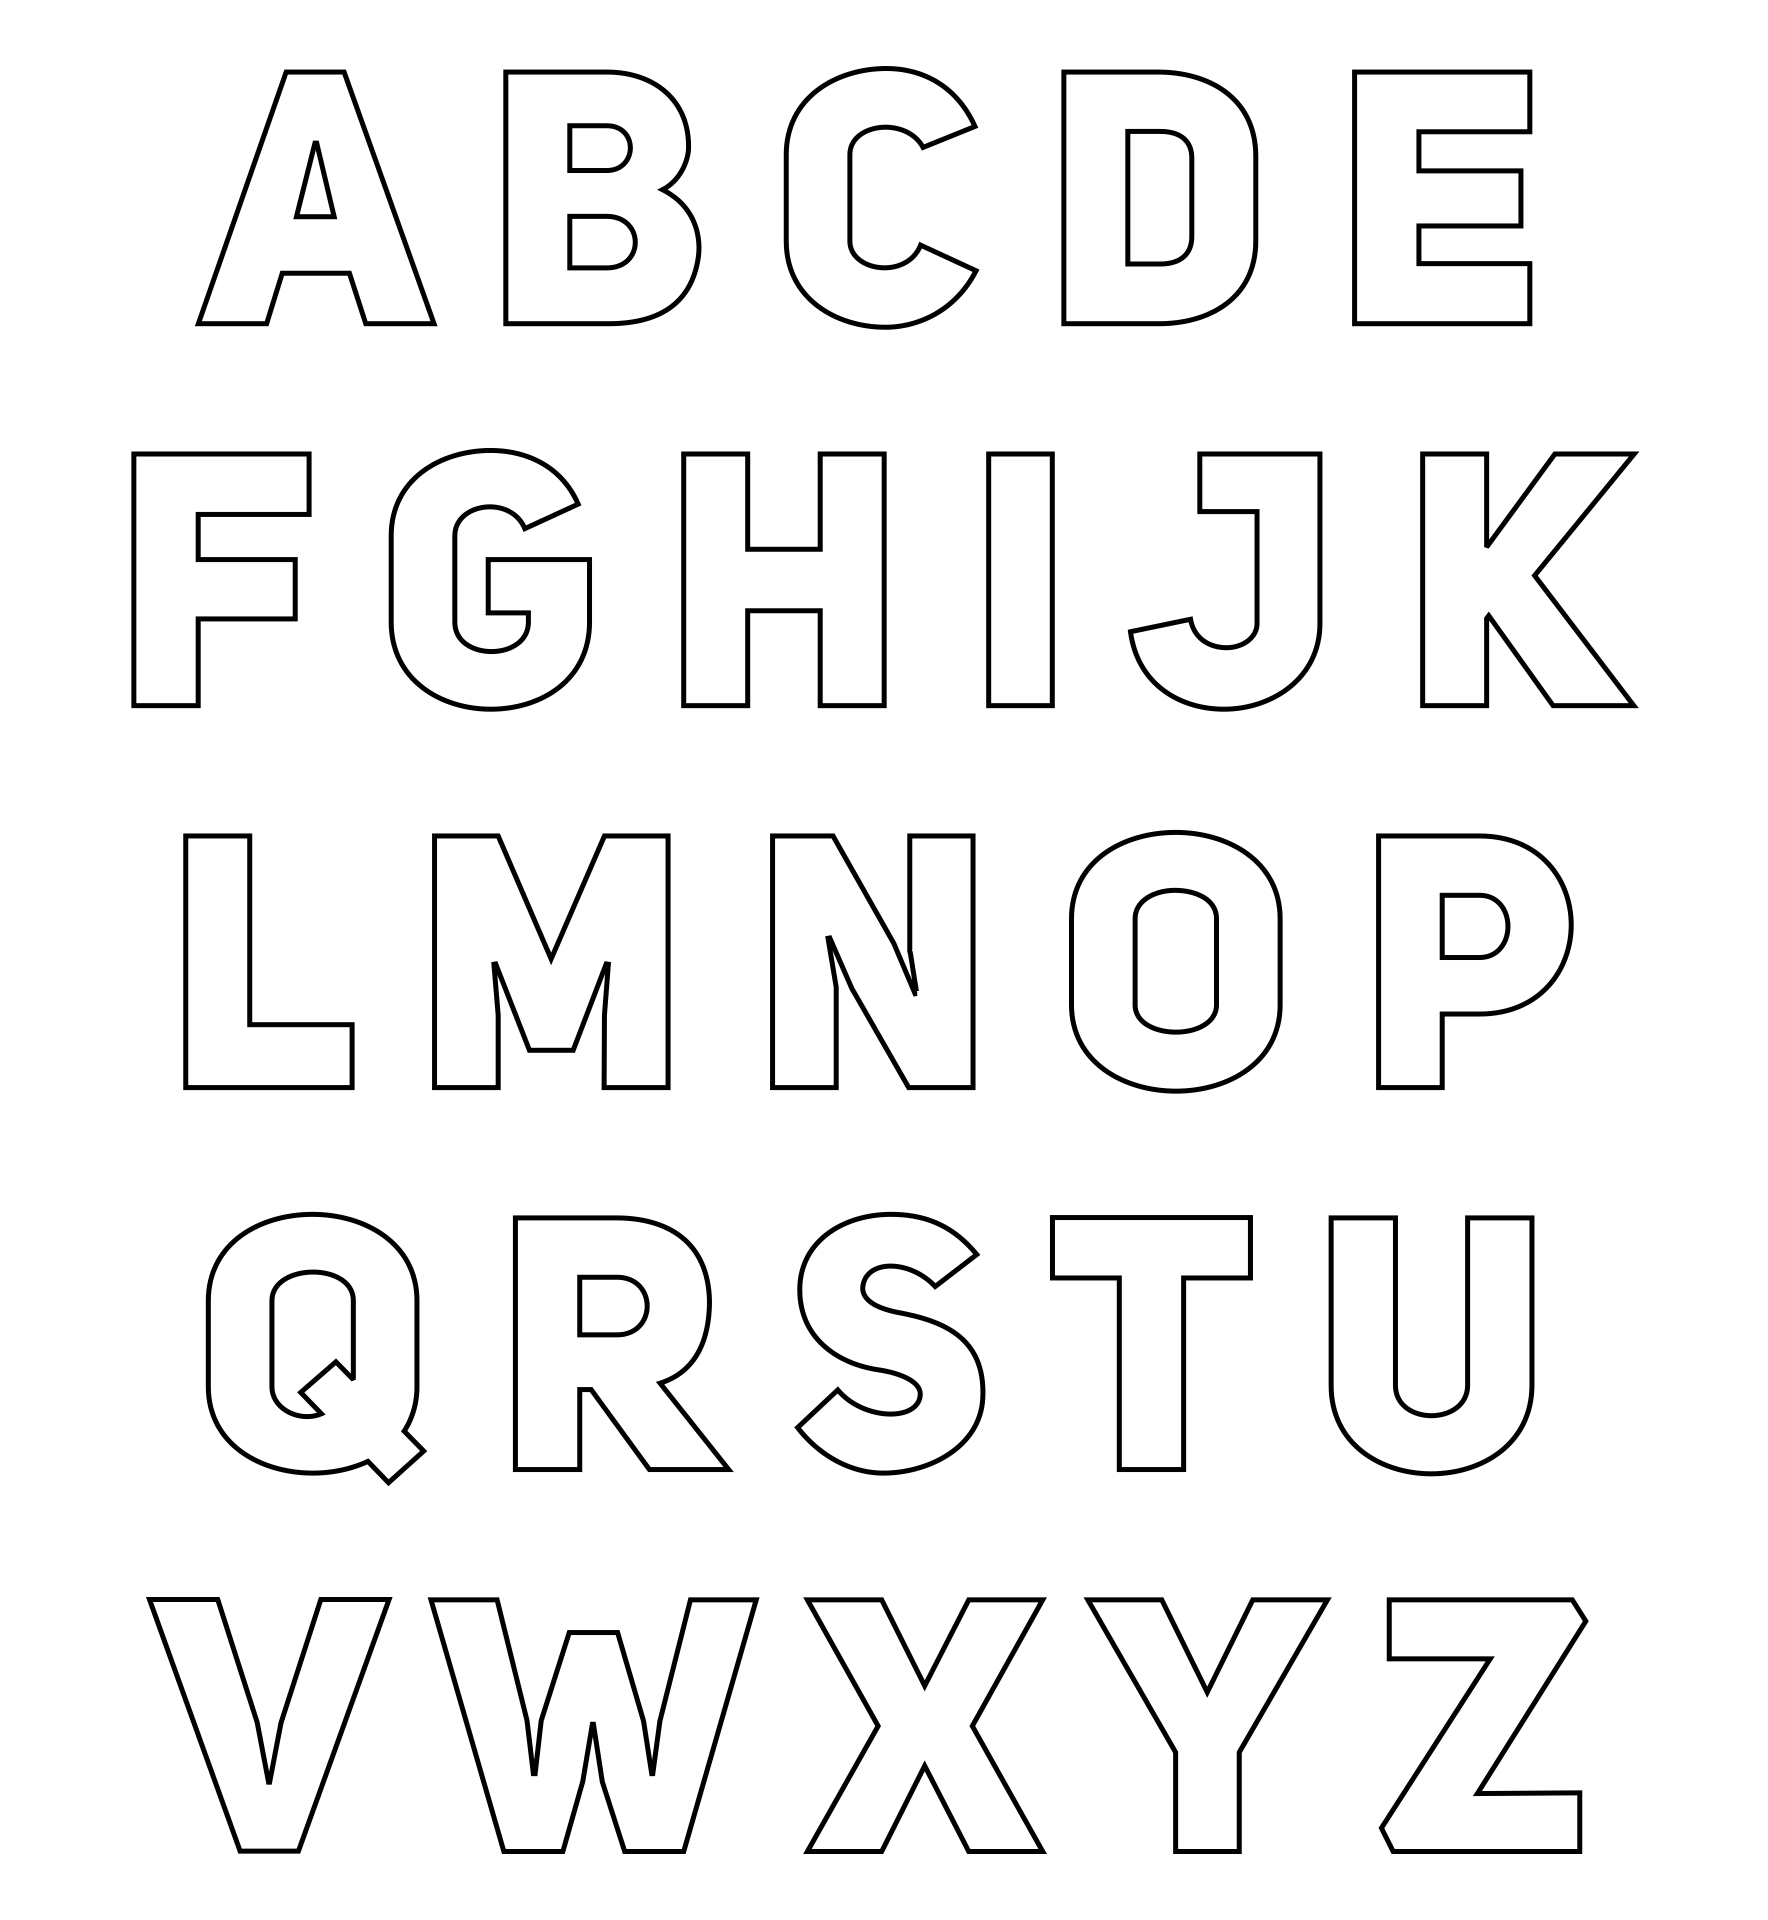 cut-out-free-printable-letter-template-printable-templates